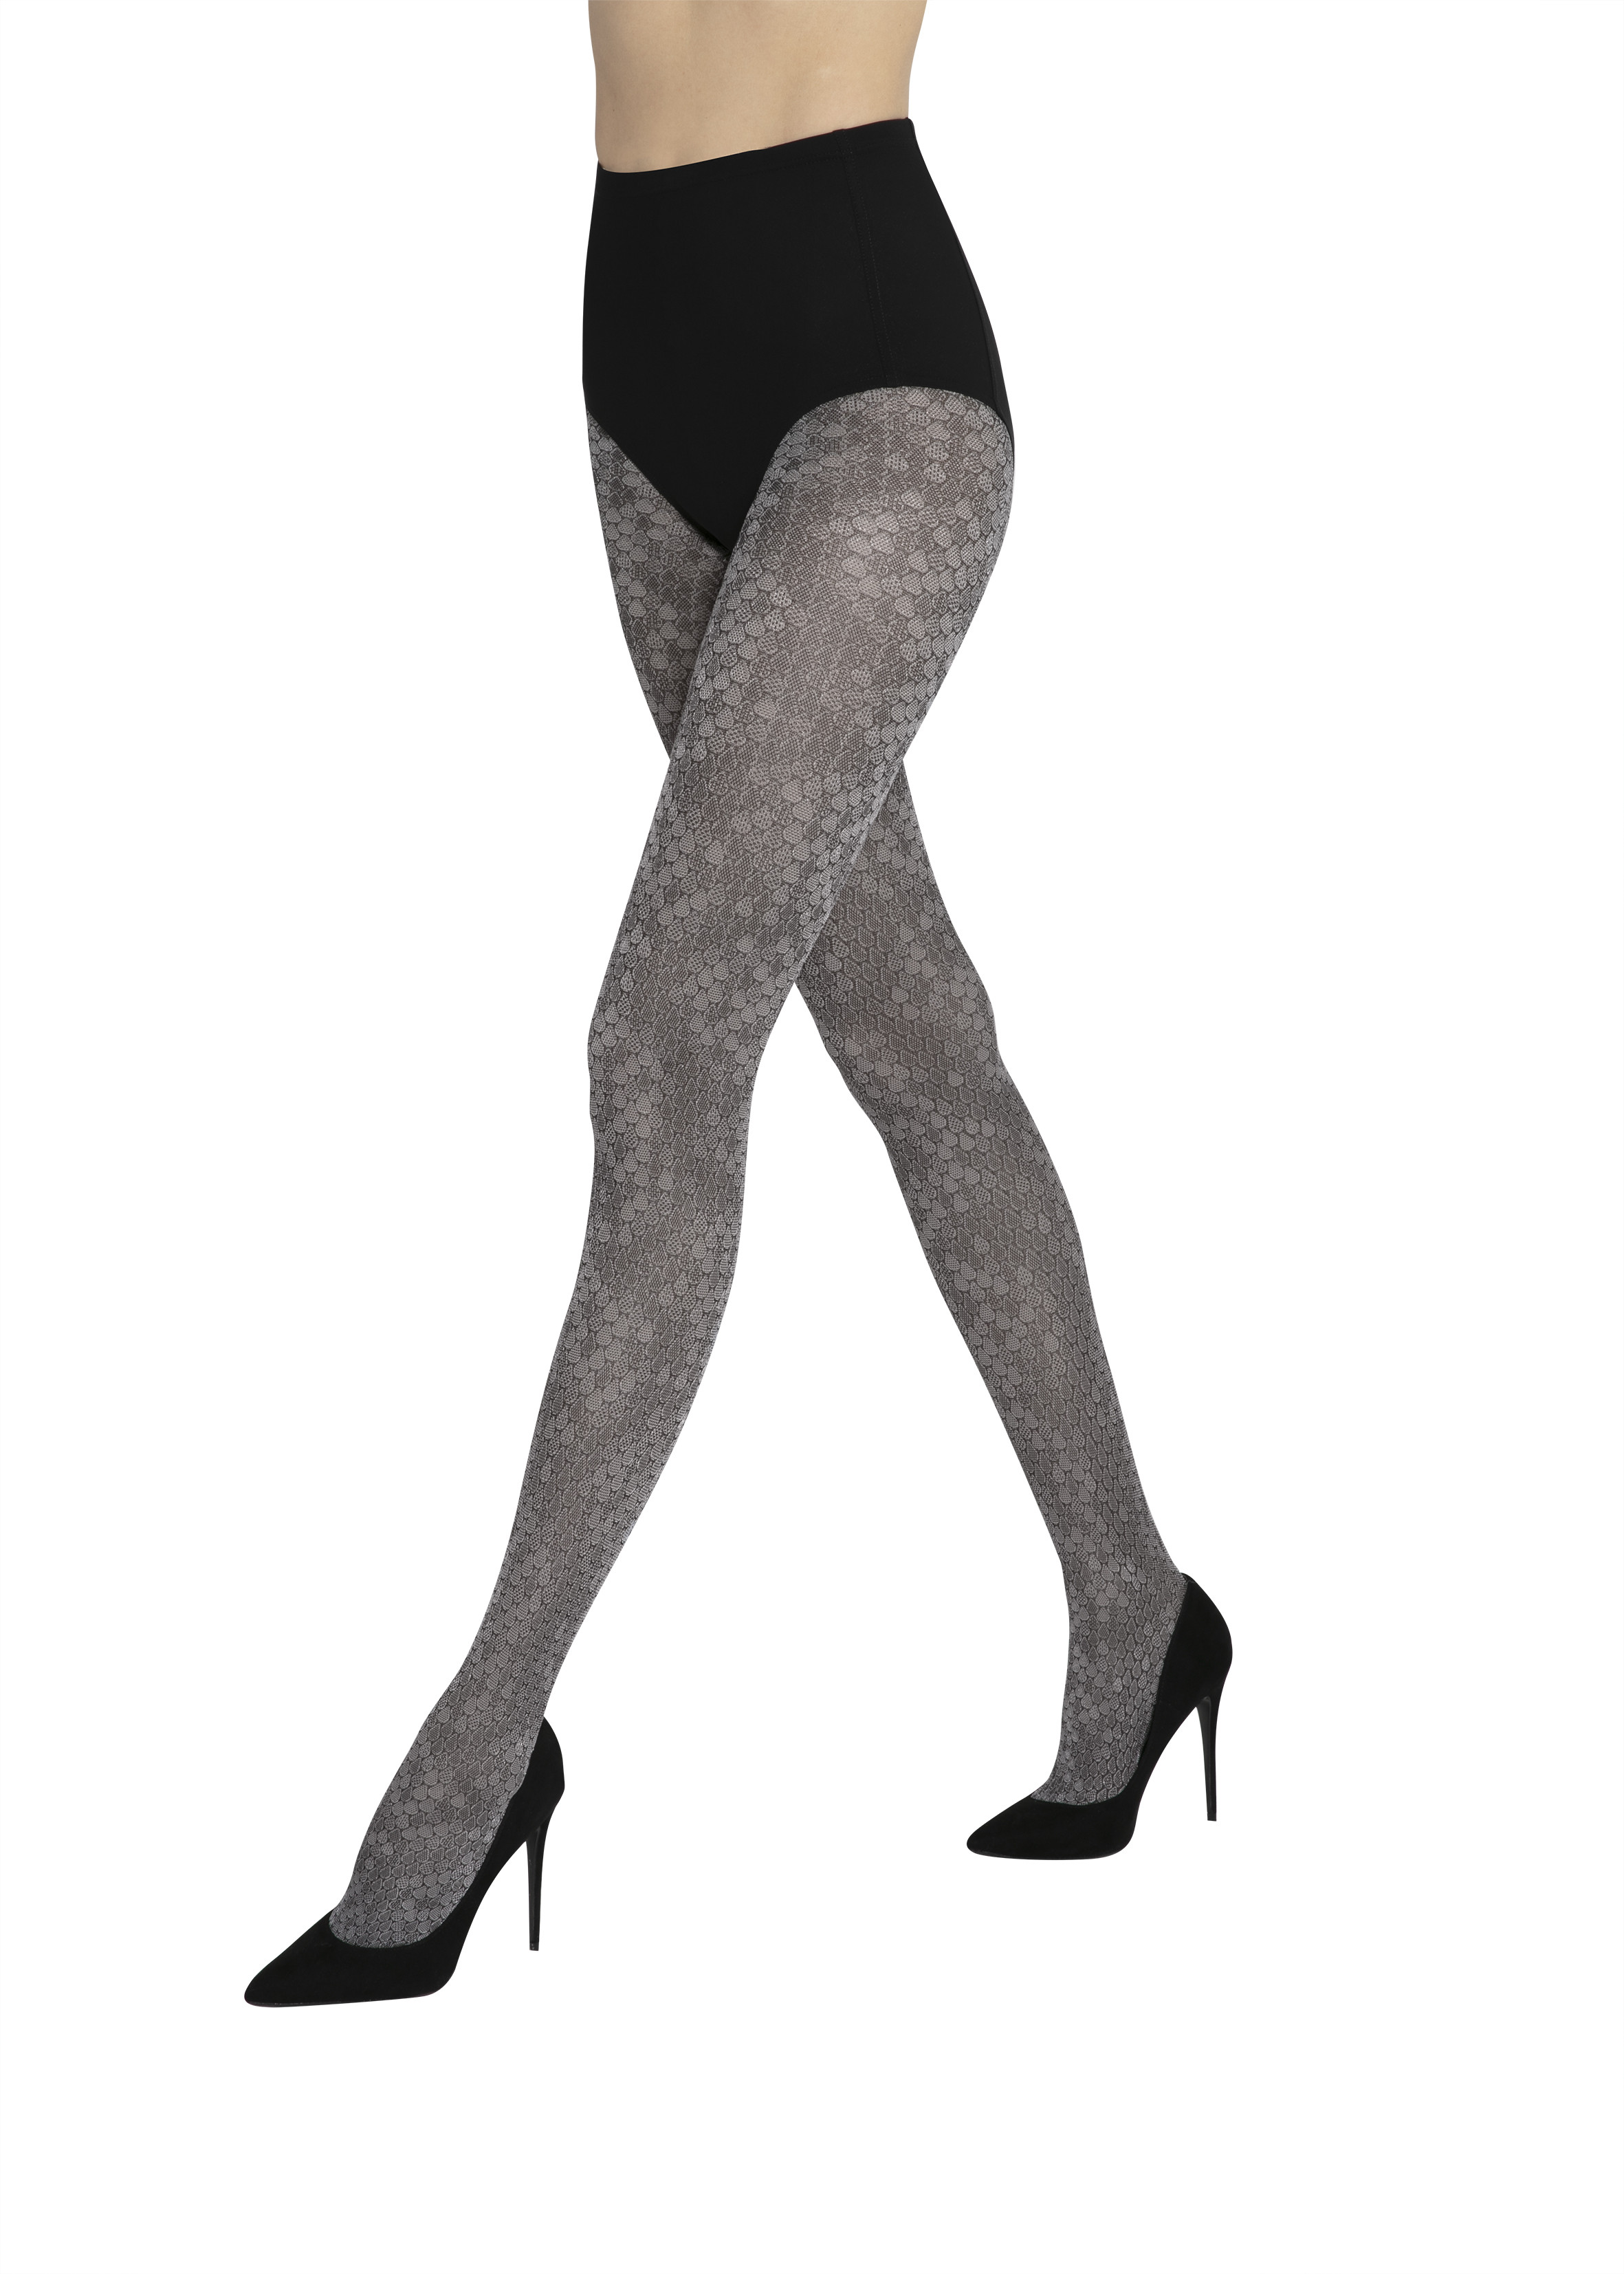  Grey Tights For Women